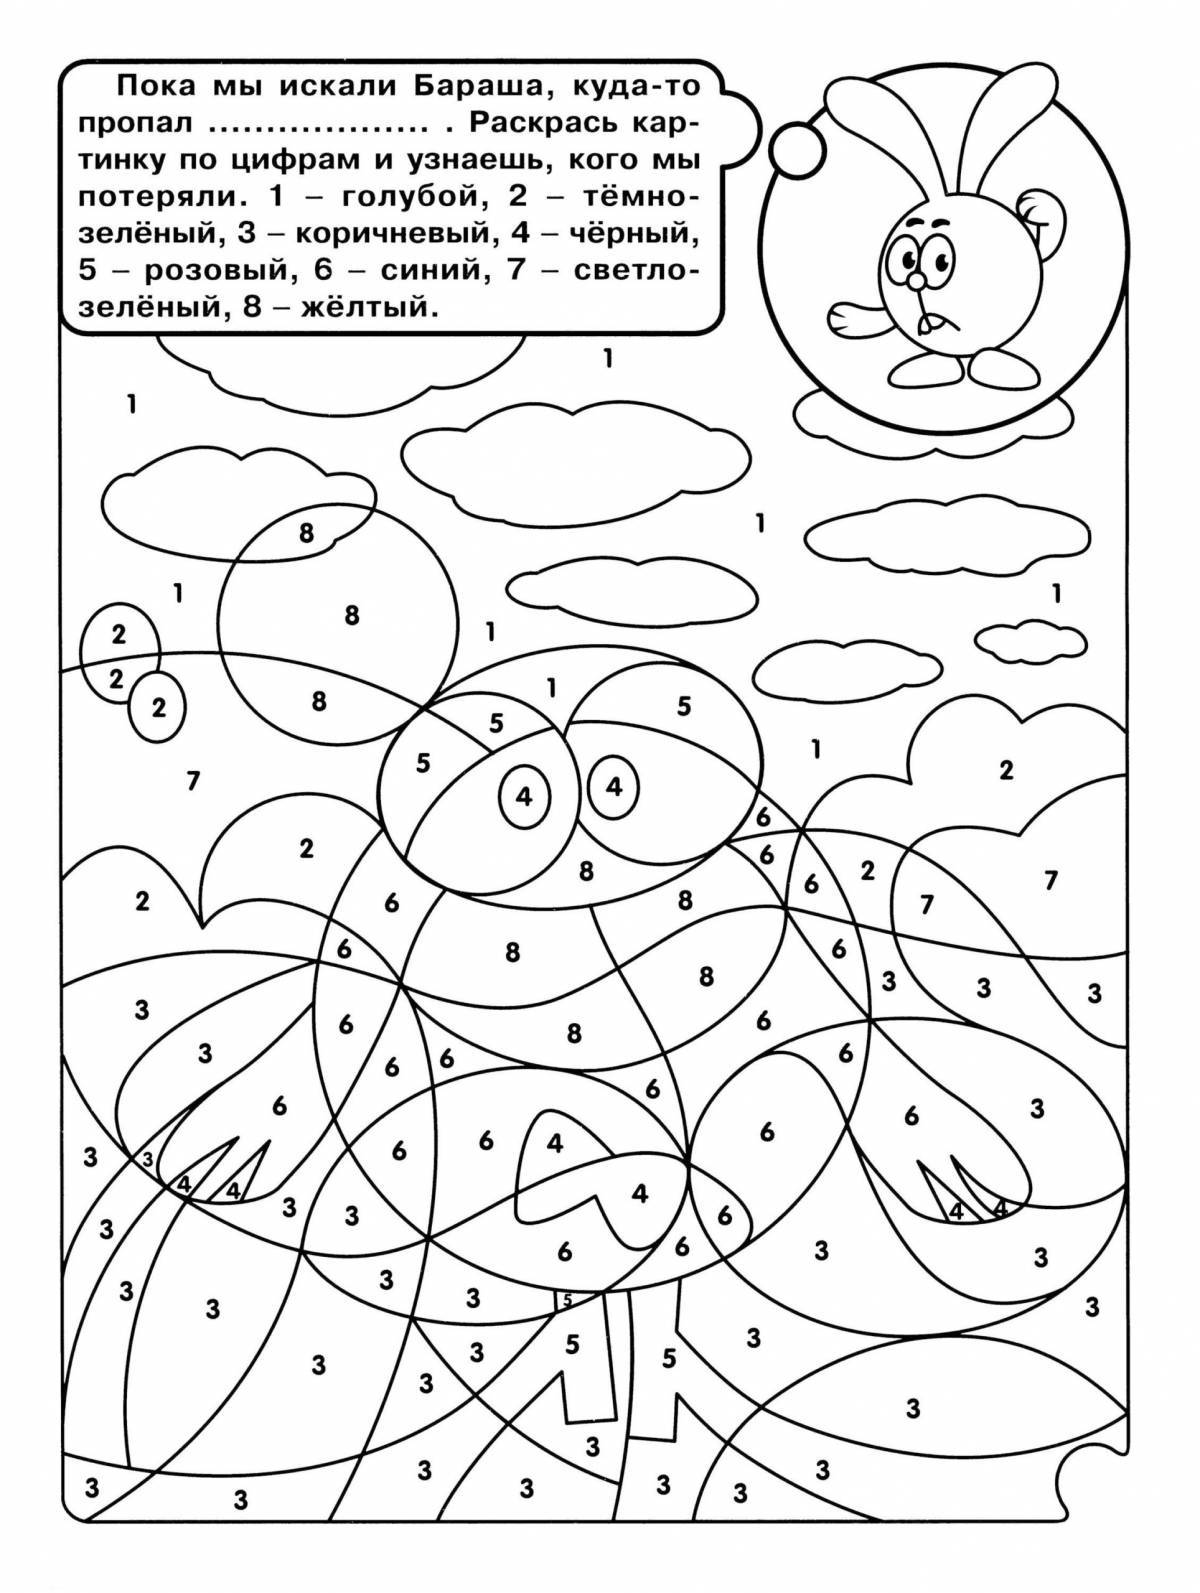 Fun coloring book for kids 6-7 years old